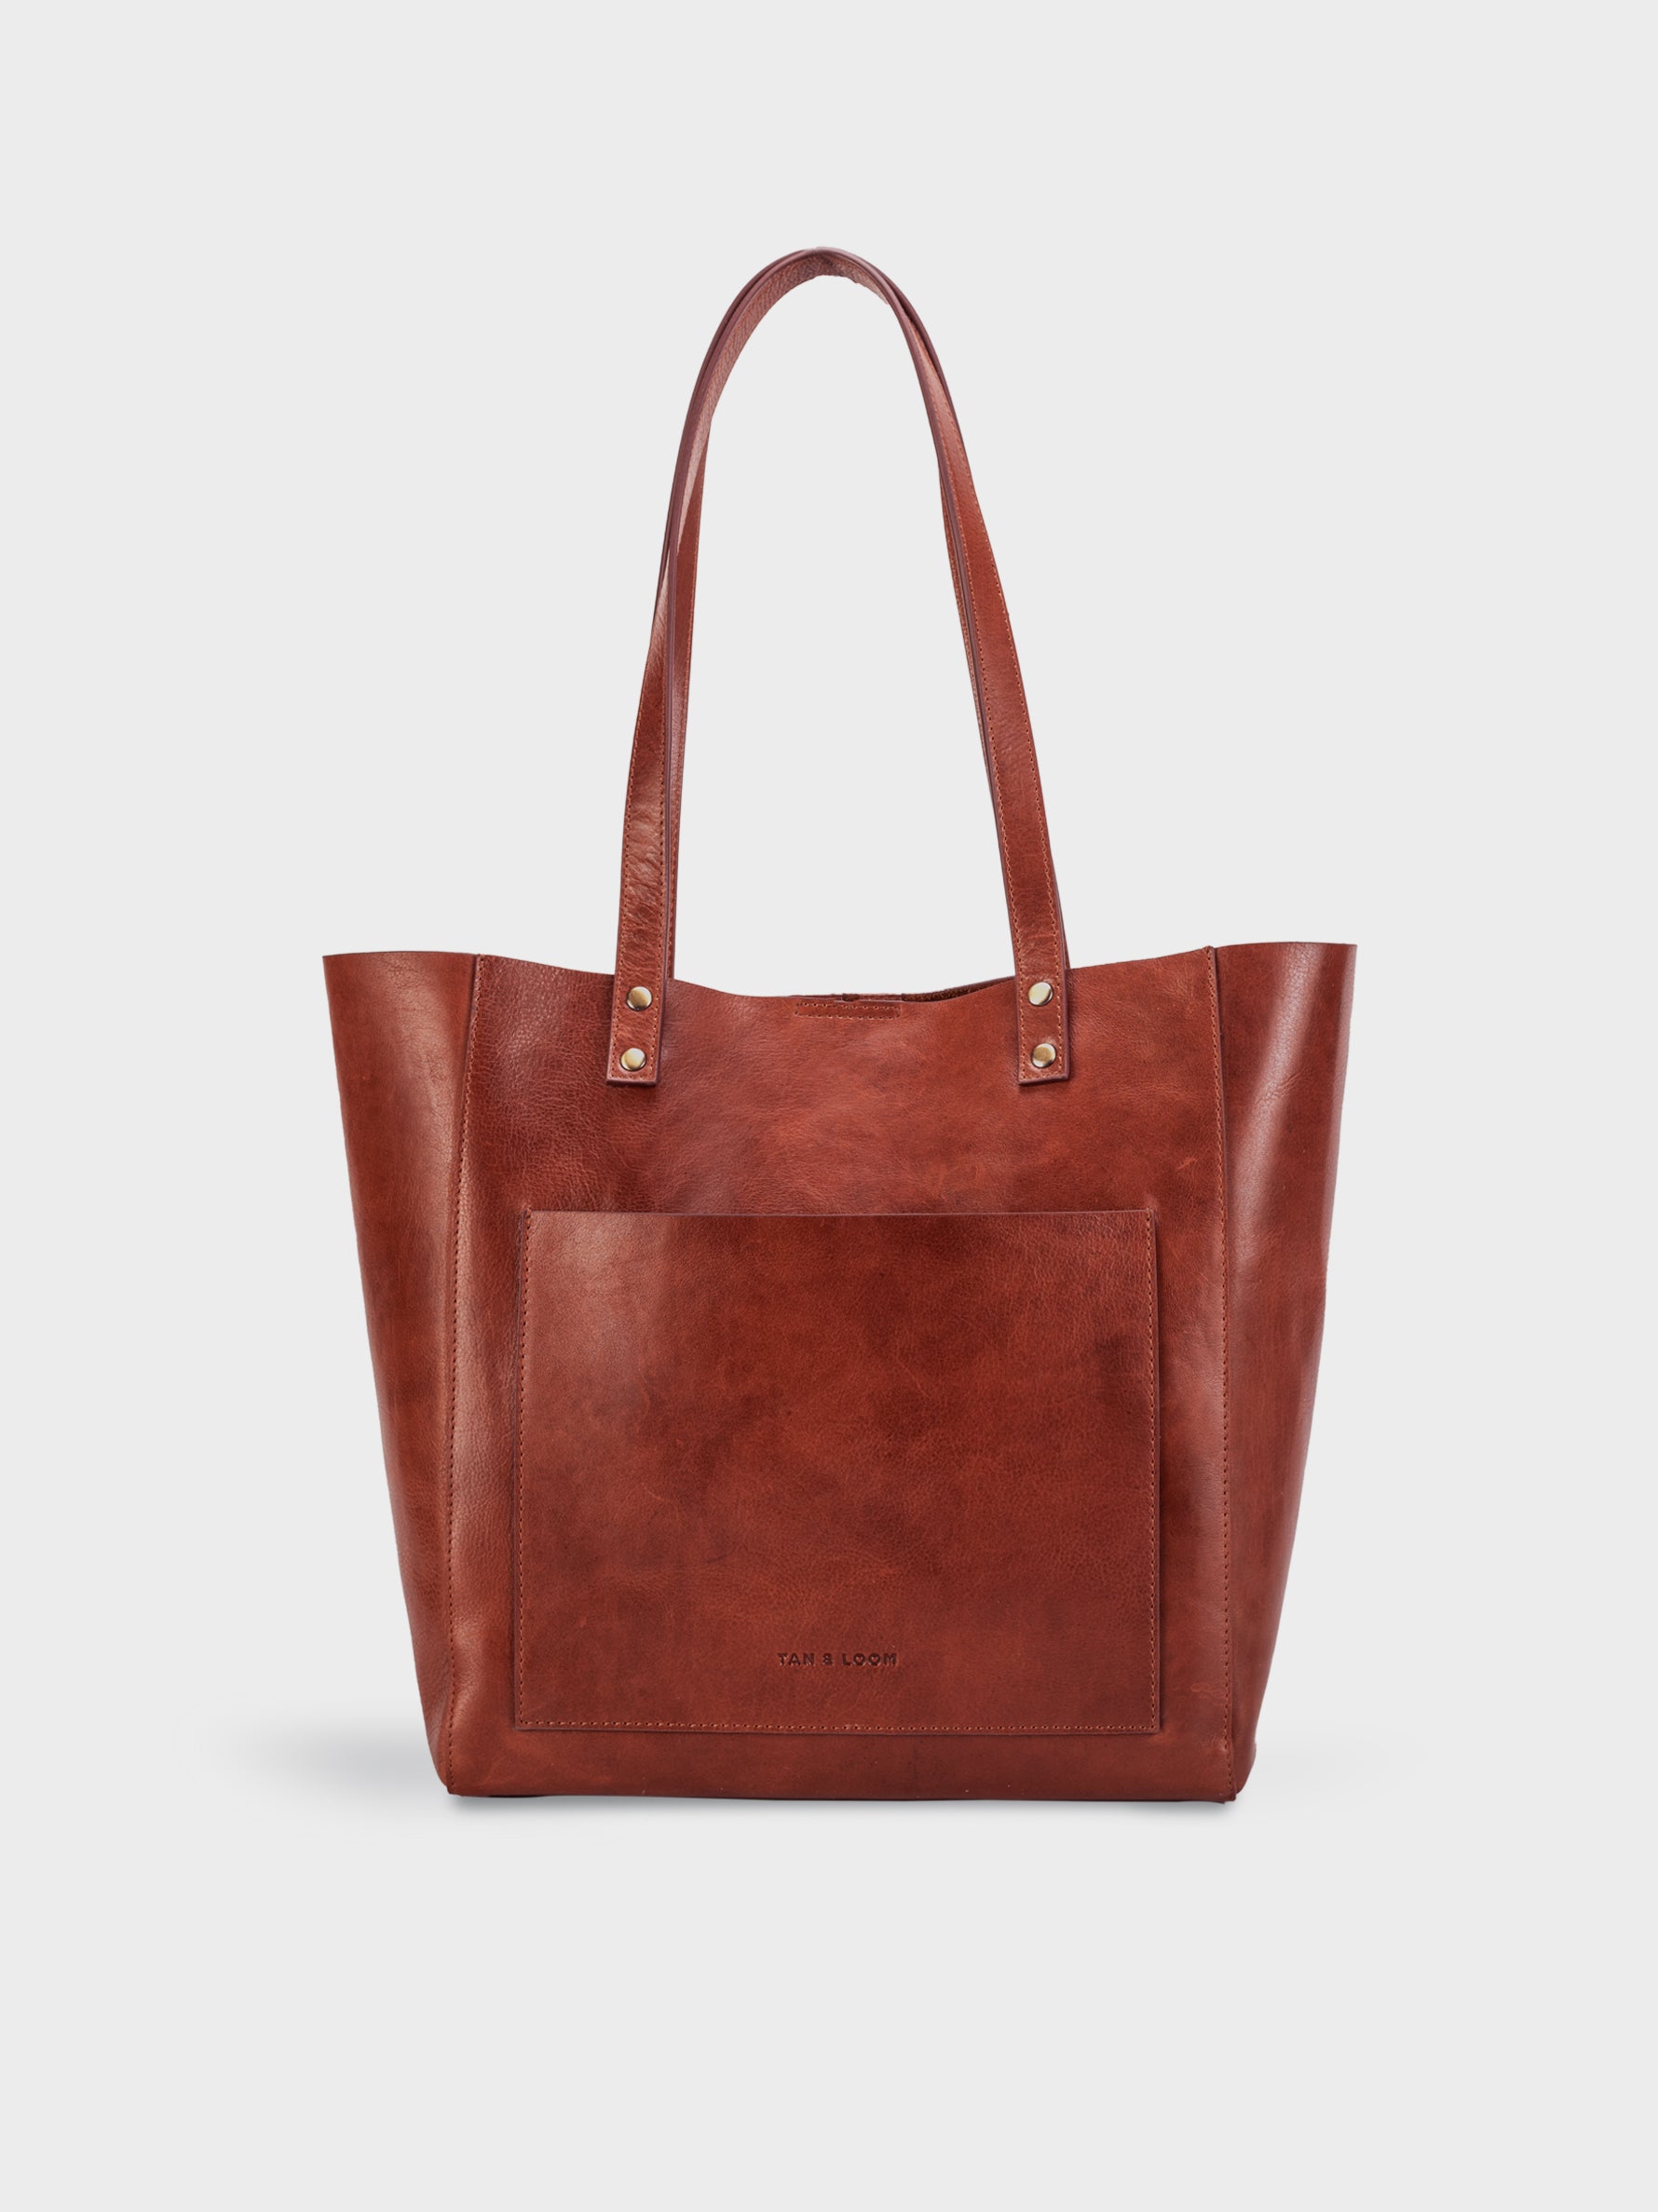 Handcrafted Genuine Vegetable Tanned Leather Old Fashioned Tote Regular Vintage Brown for Women Tan & Loom